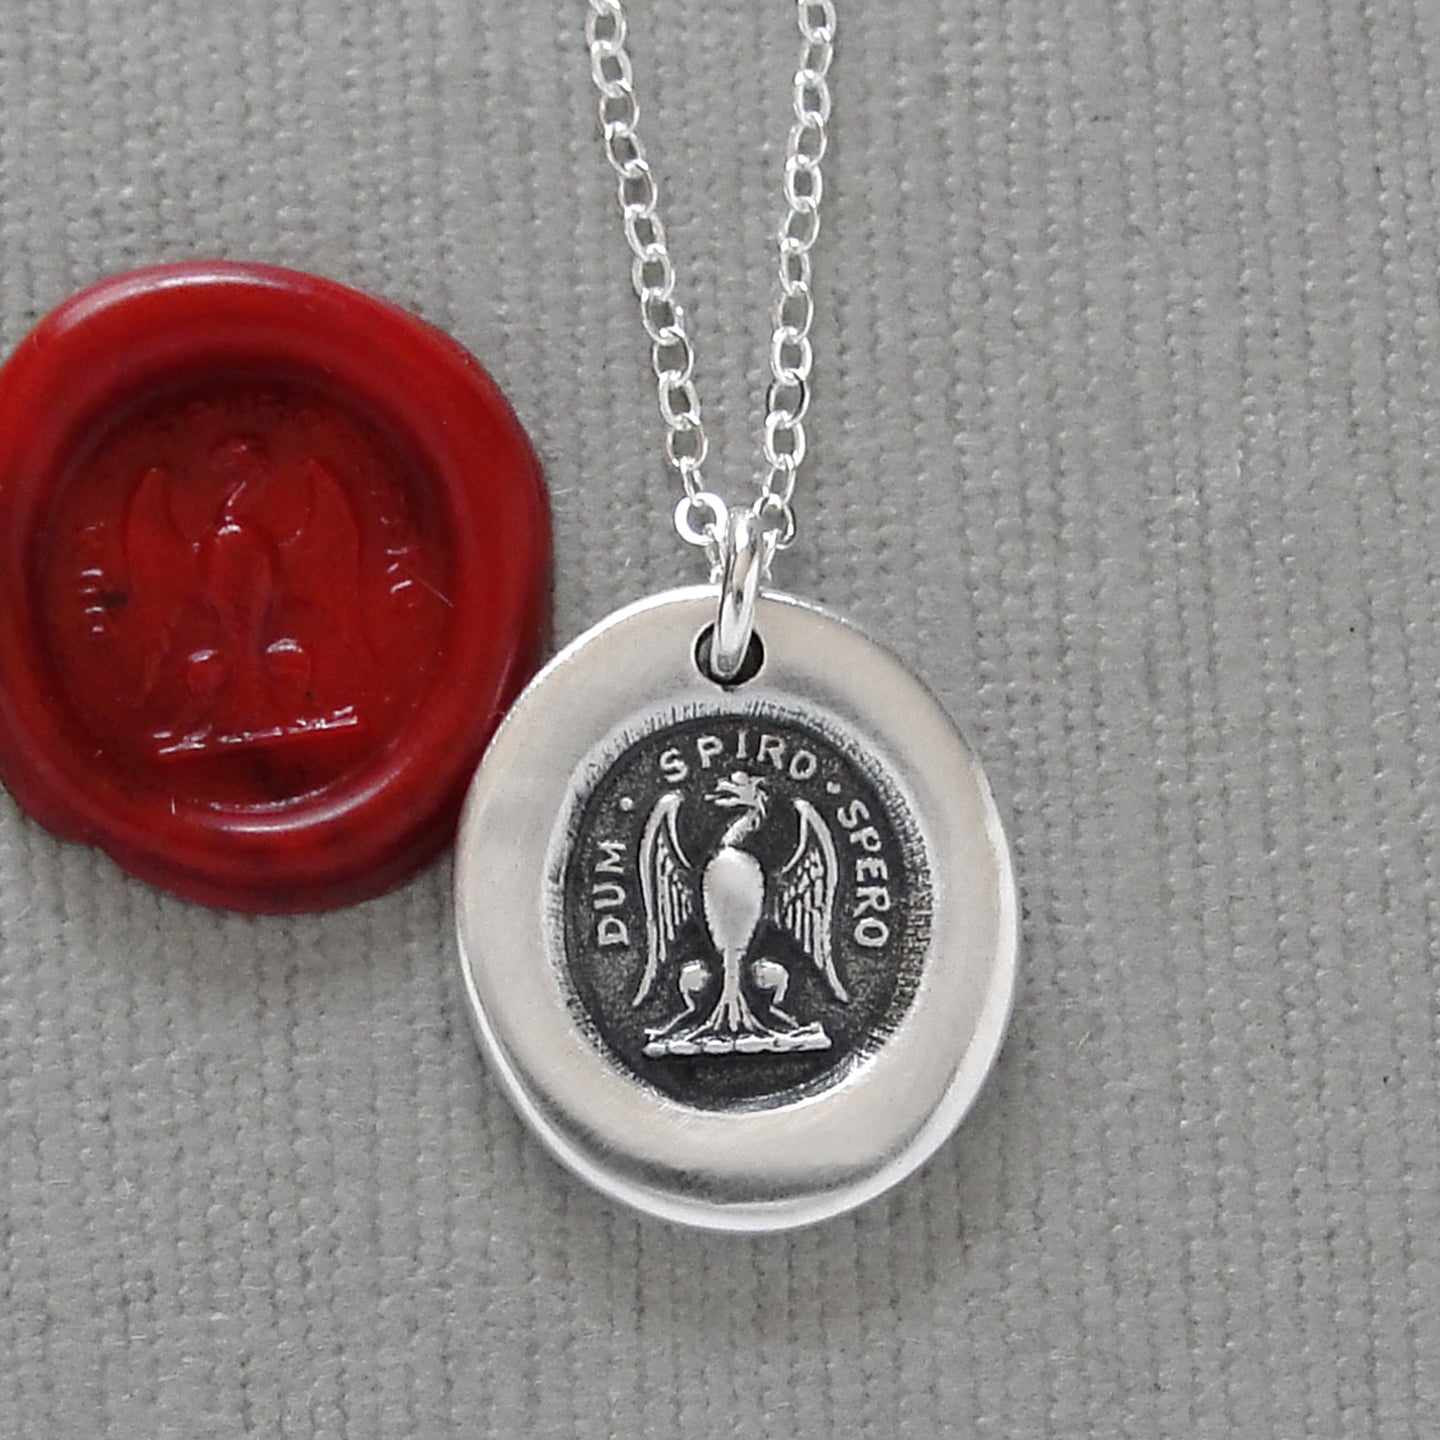 While I Breathe I Hope Wax Seal Necklace - Eagle Antique Silver Wax Seal Jewelry